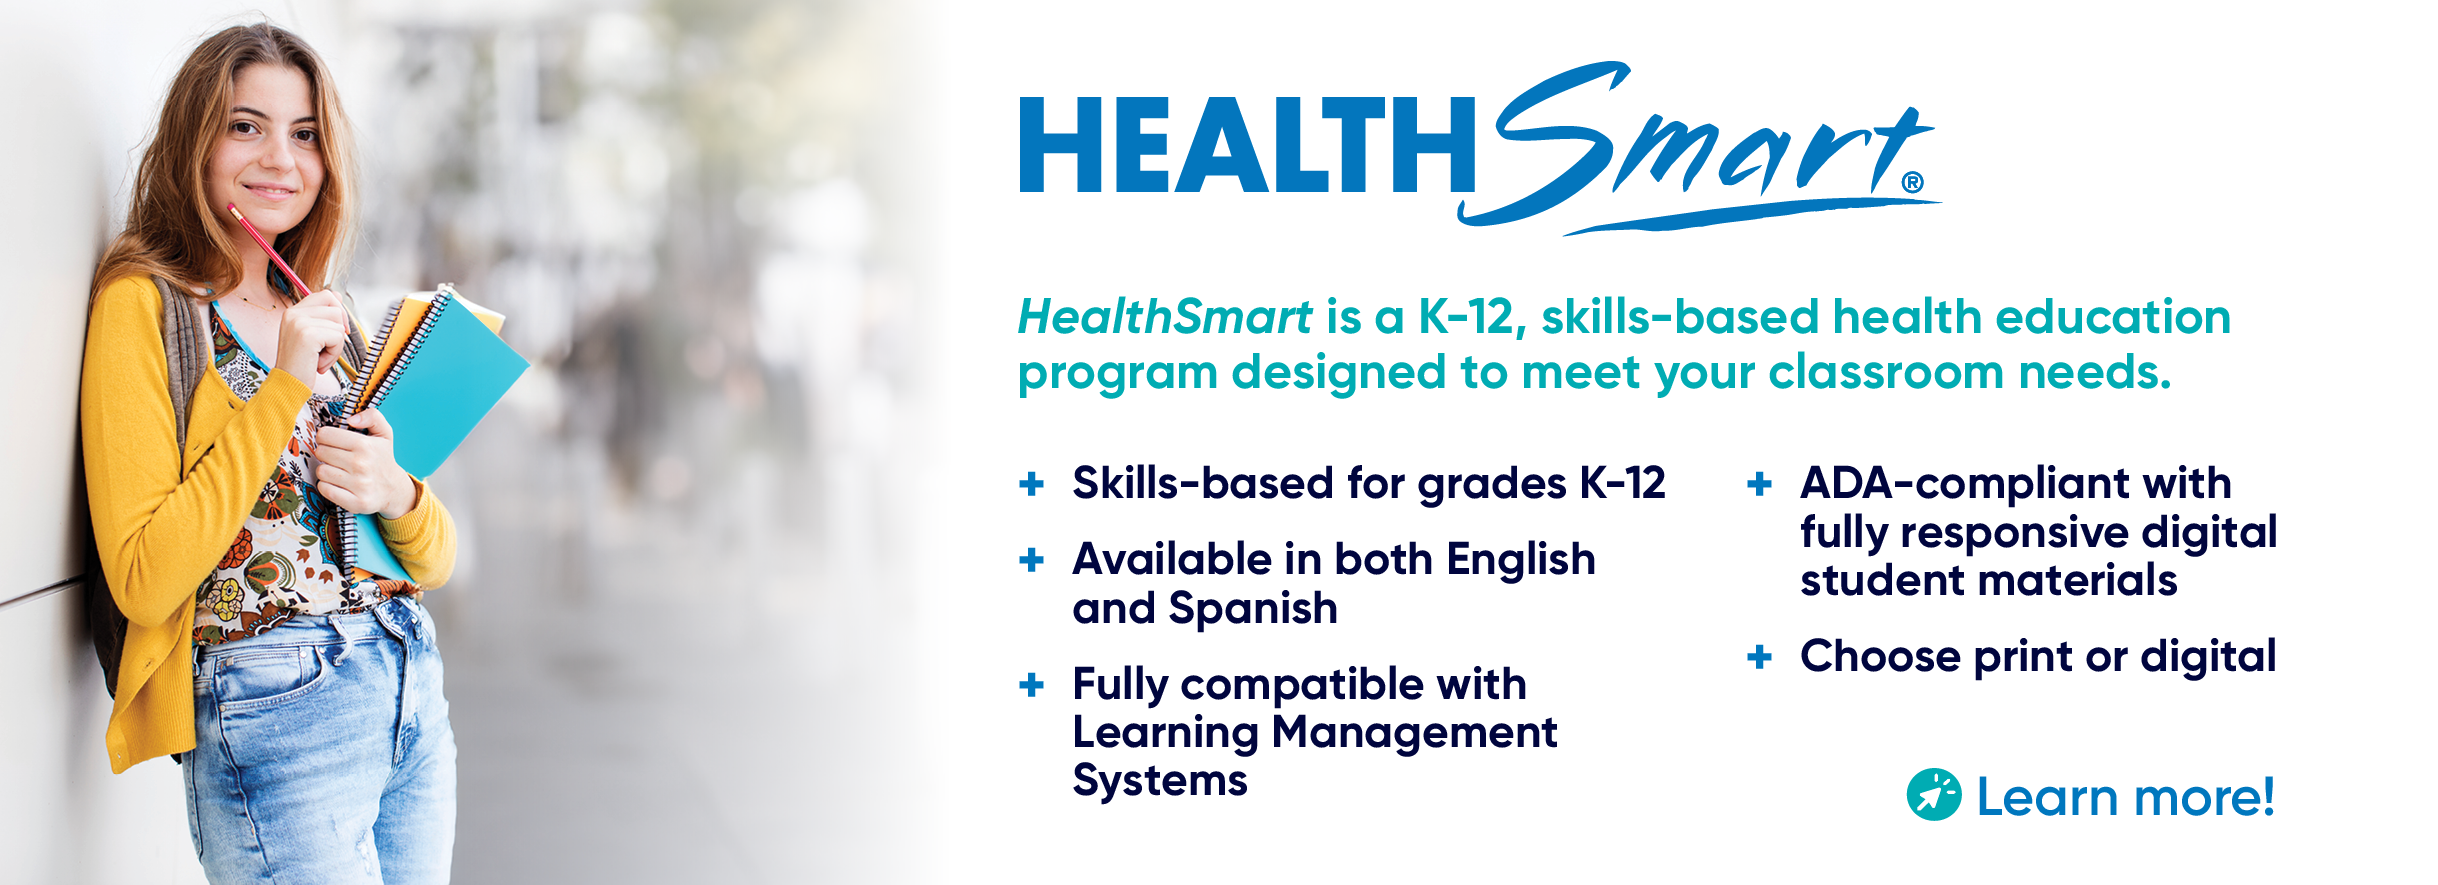 HealthSmart is a K-12, skills-based health education program designed to meet your classroom needs. Skills-based for grades K-12. Available in both English and Spanish. Fully compatible with Learning Management Systems. ADA-compliant with fully responsive digital student materials. Choose print or digital. Learn more!